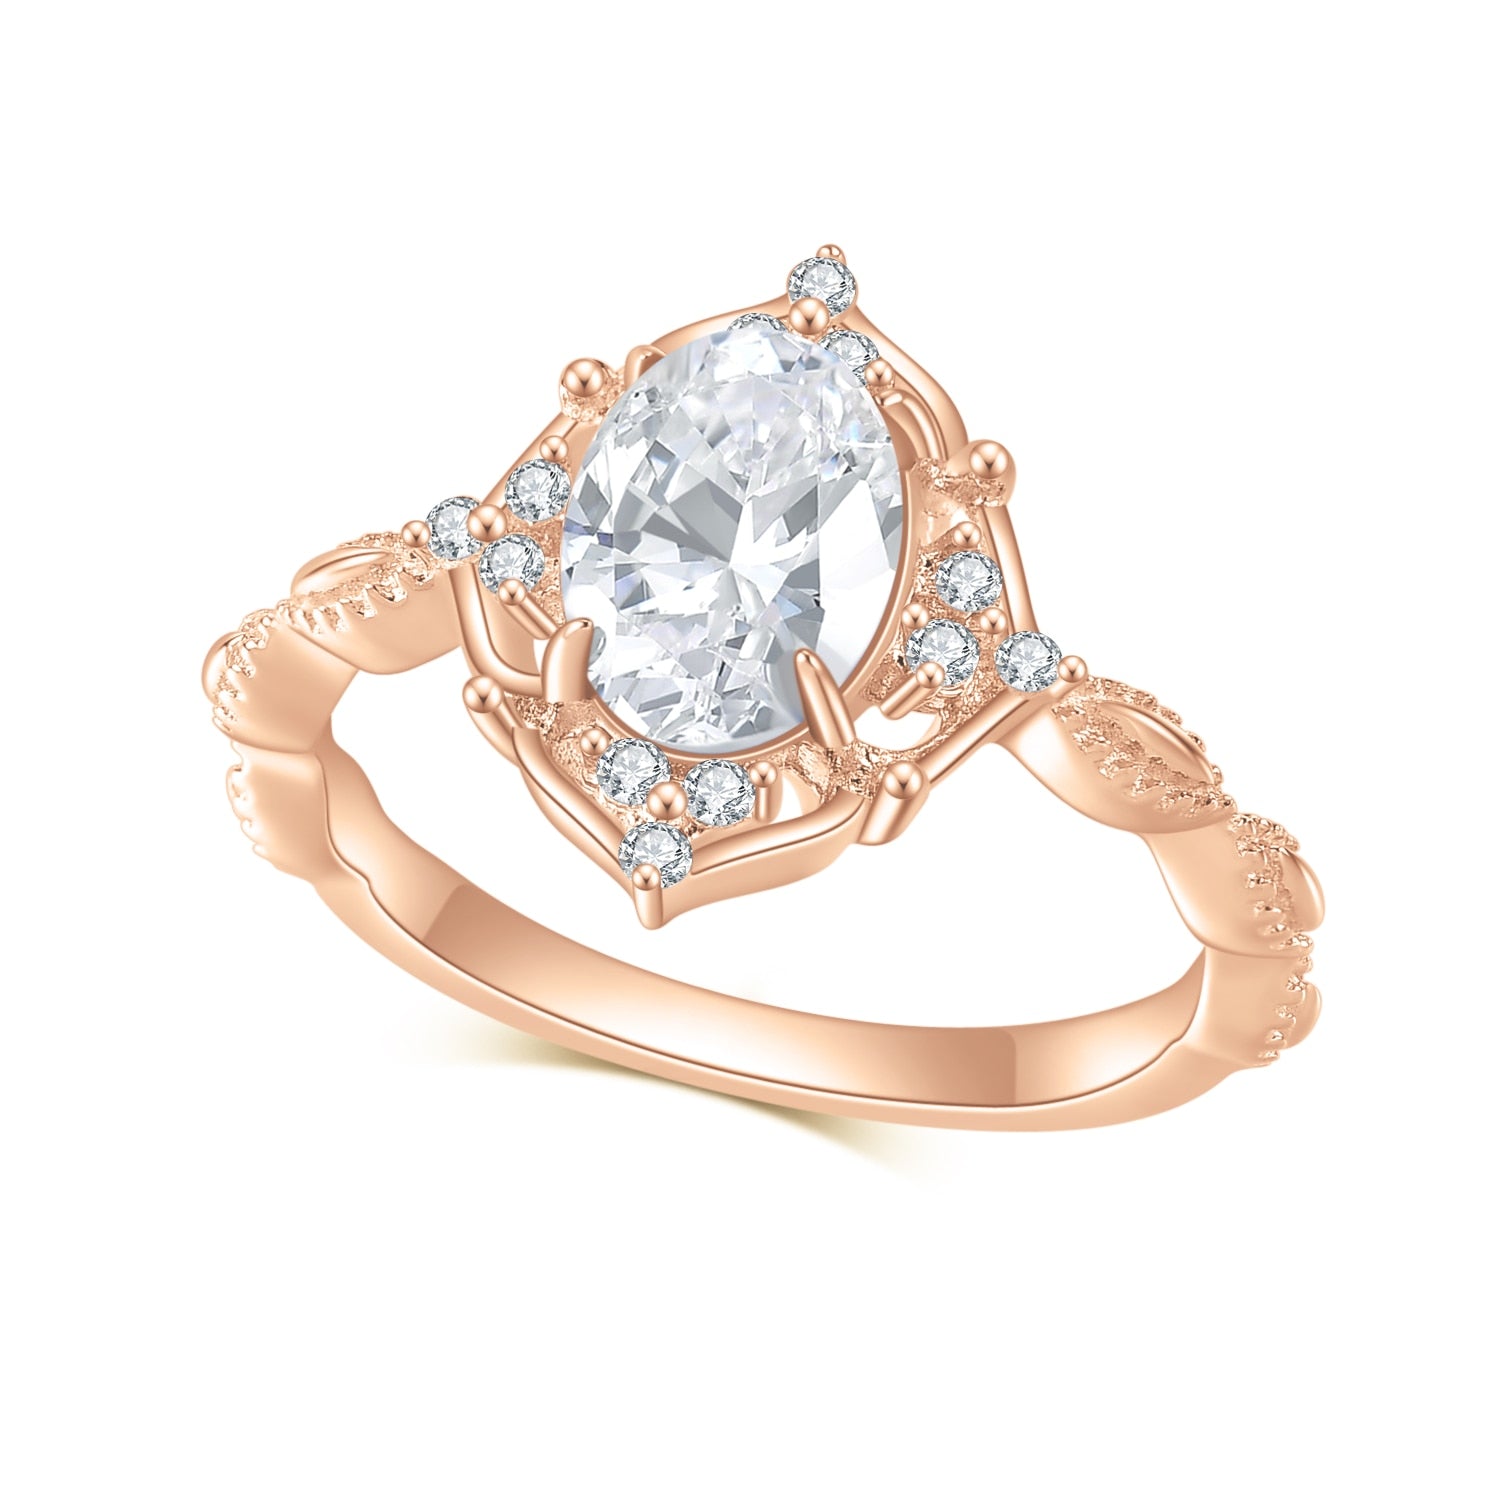 Solid rose gold vintage style halo engagement ring set with an oval cut moissanite.